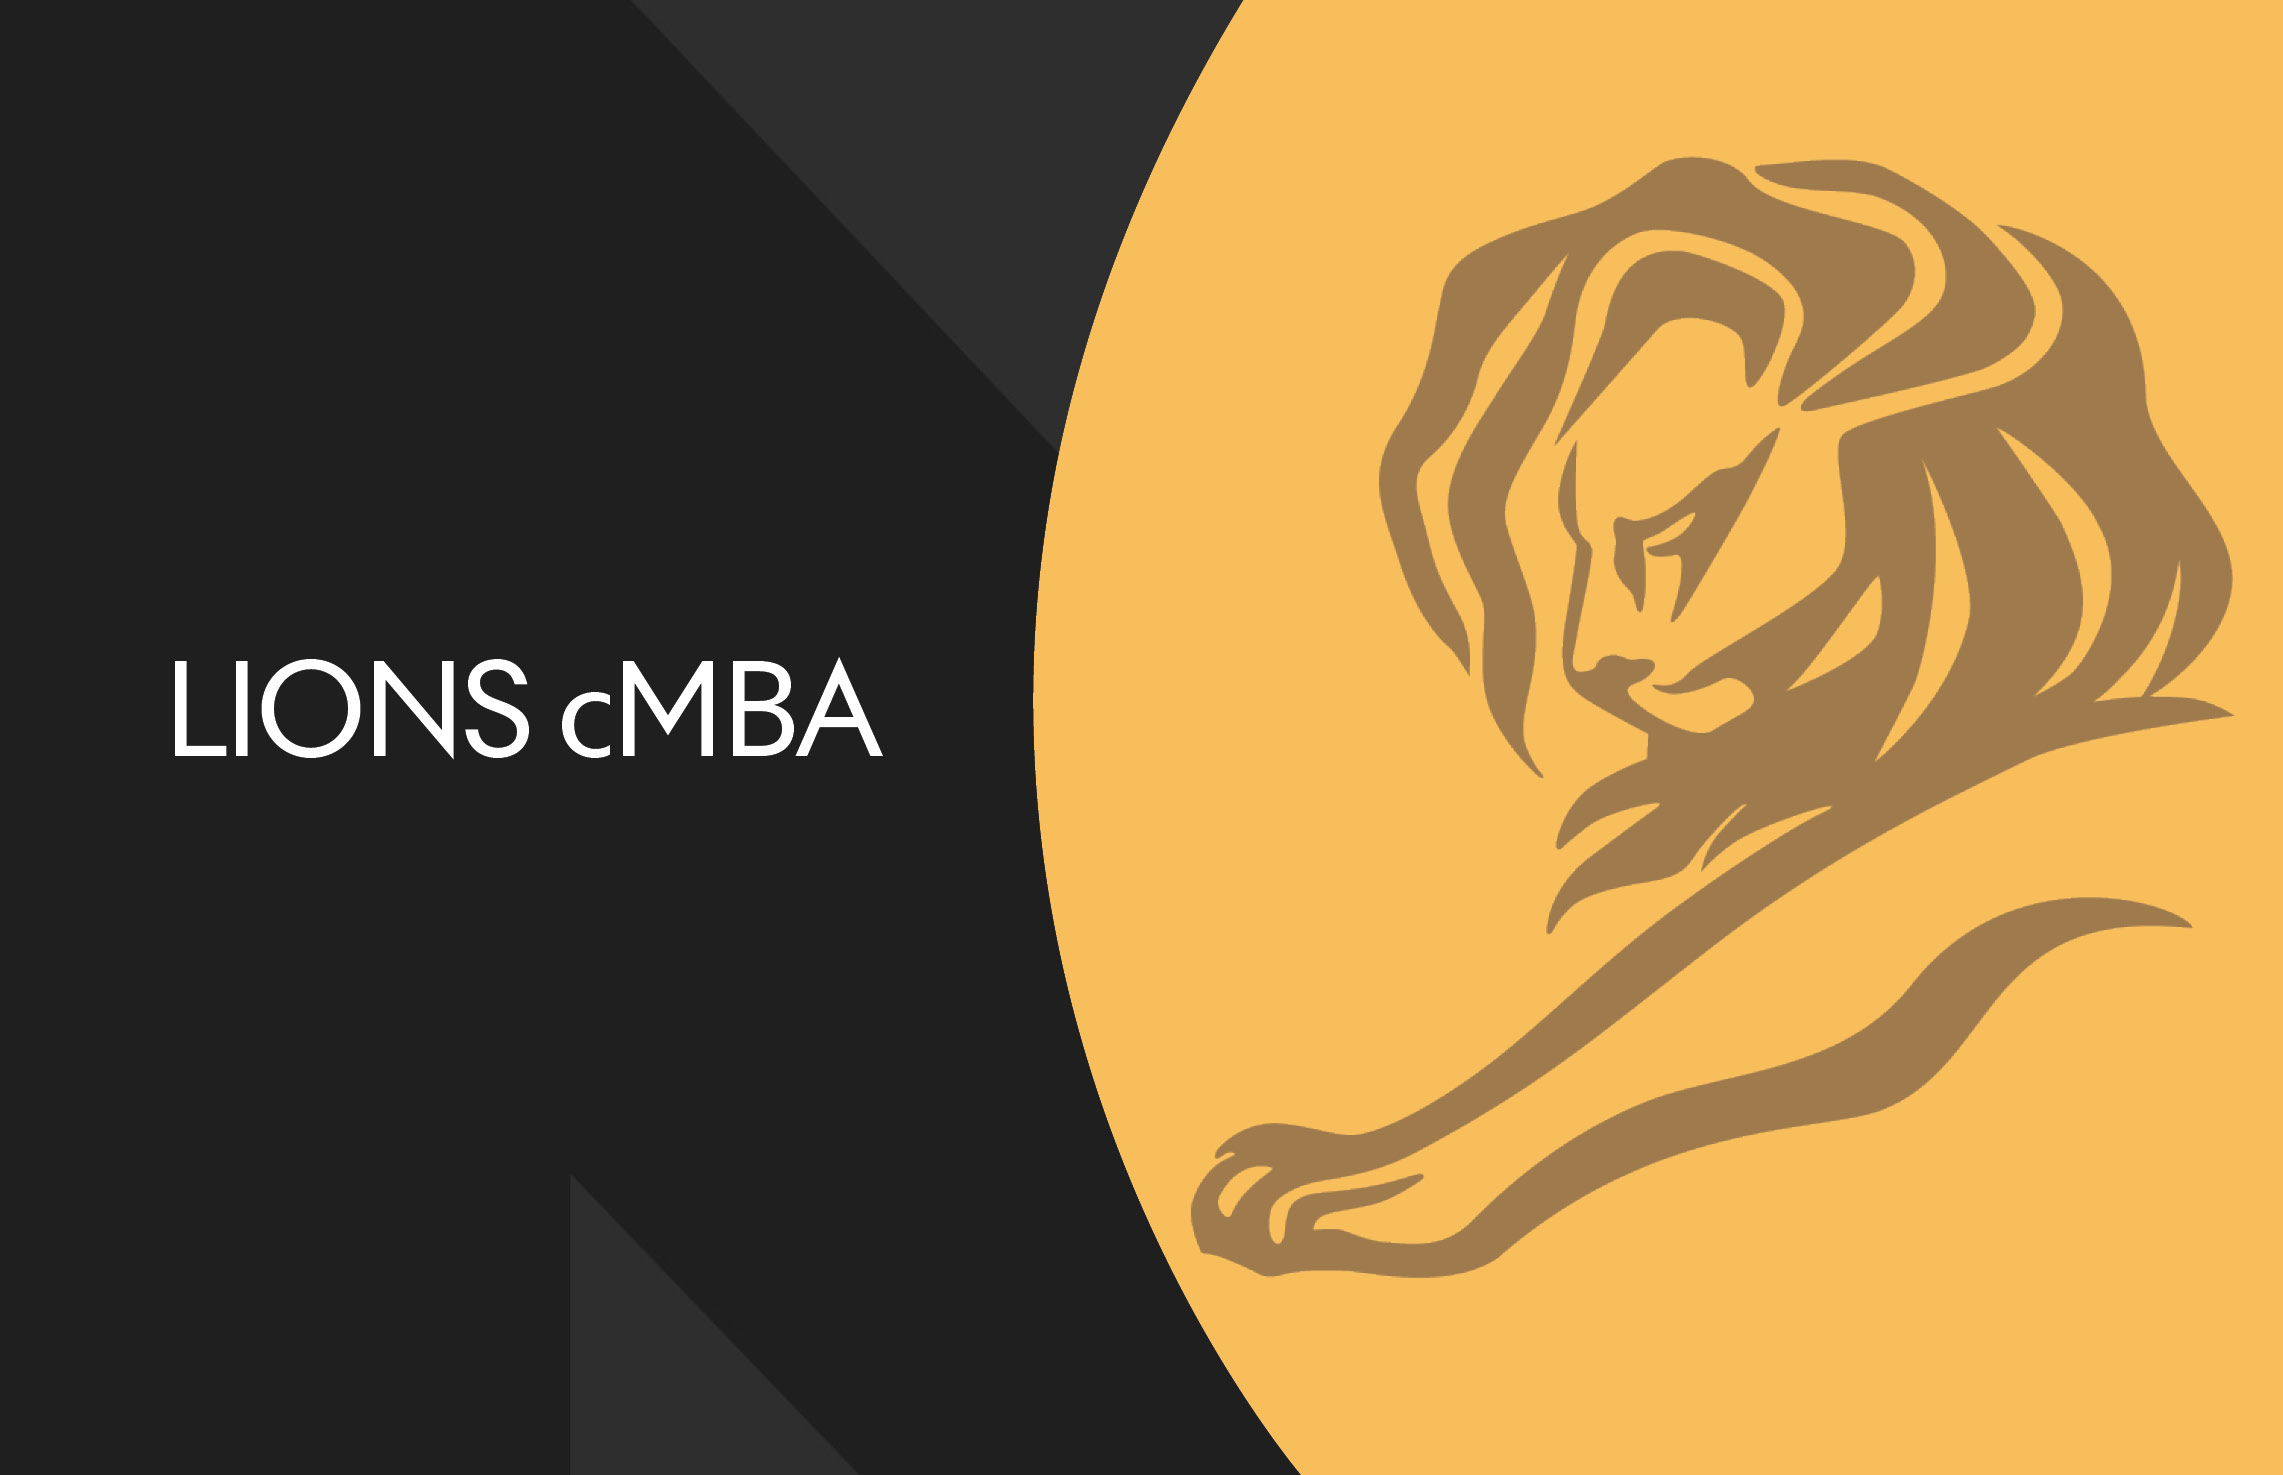 LIONS launches its first global Creative MBA (LIONS cMBA)